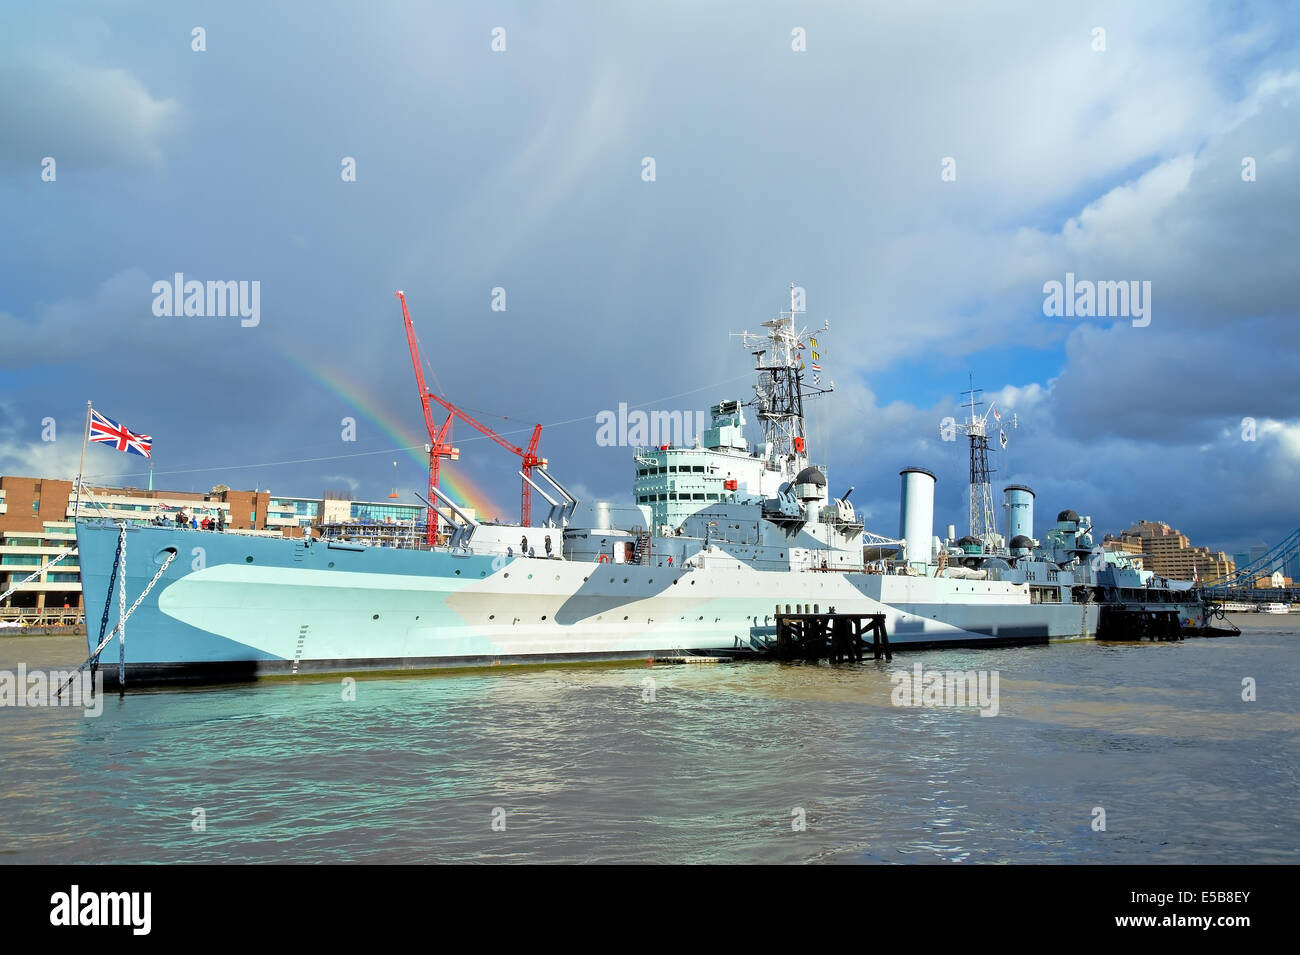 HMS Belfast during inclement weather conditions. Stock Photo